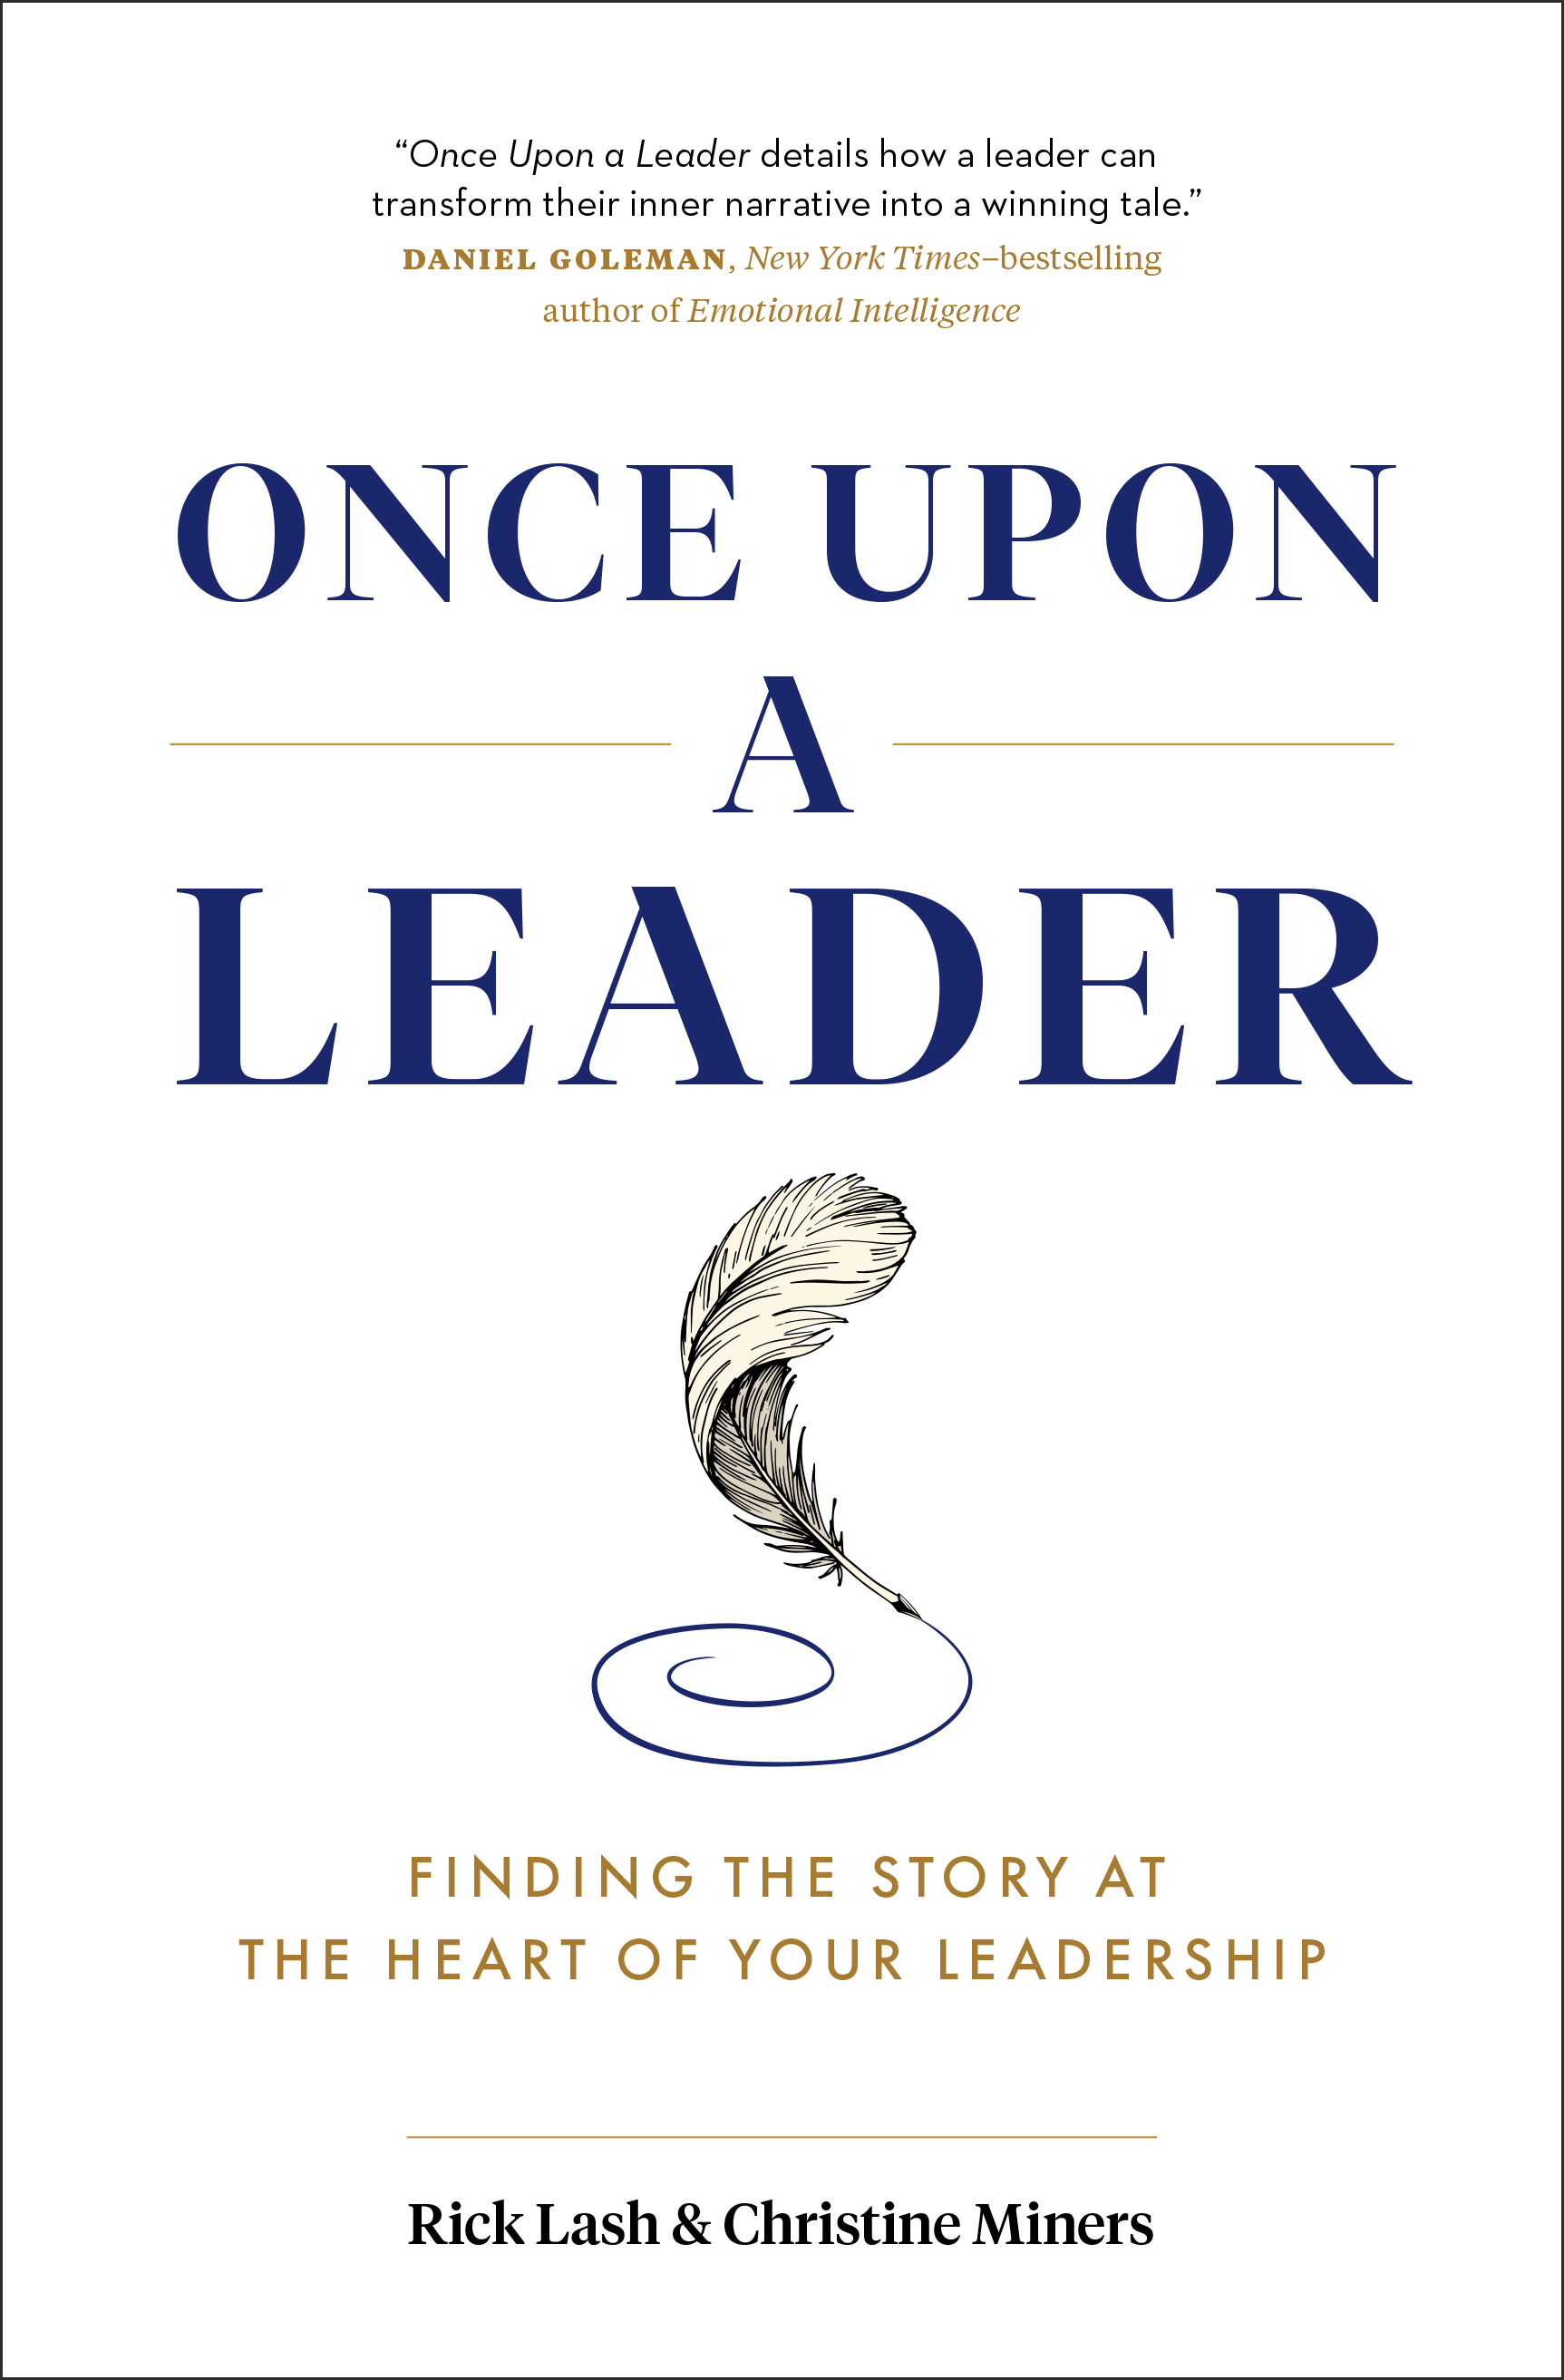 Once Upon a Leader by Rick Lash and Christine Miners